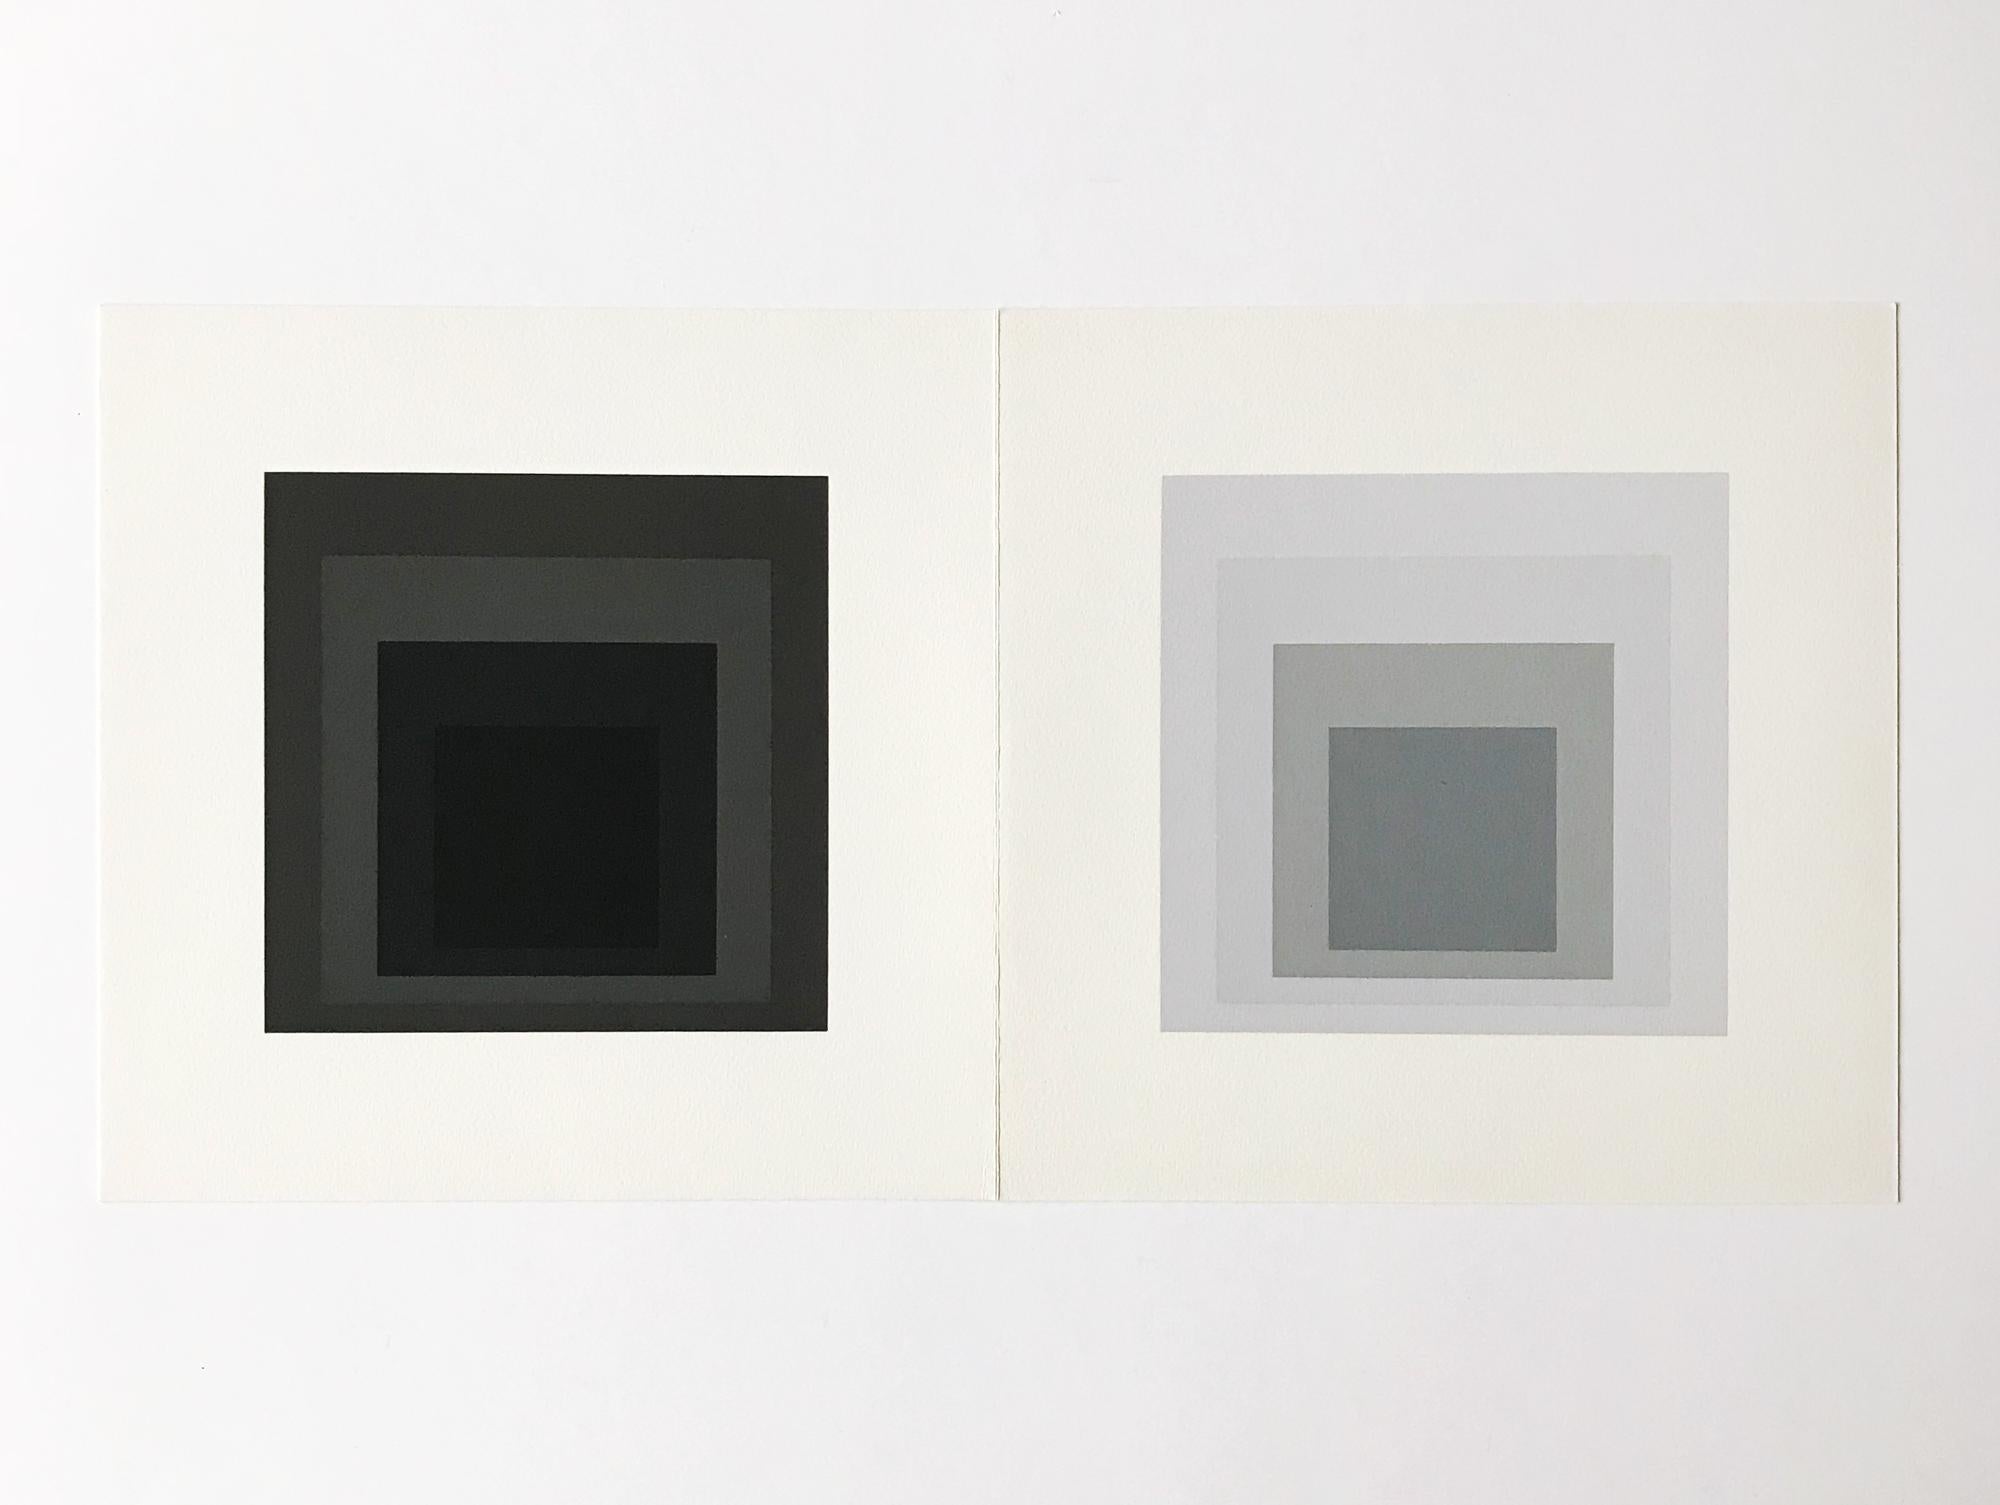 after Josef Albers  (Bottrop 1888 – 1976 New Haven)
Untitled (Announcement card for two editions, published to celebrate his 84th Birthday), 1972
Medium: Two Screenprints on wove paper (with middle fold)
Print Dimensions: 19 x 19 cm
Sheet